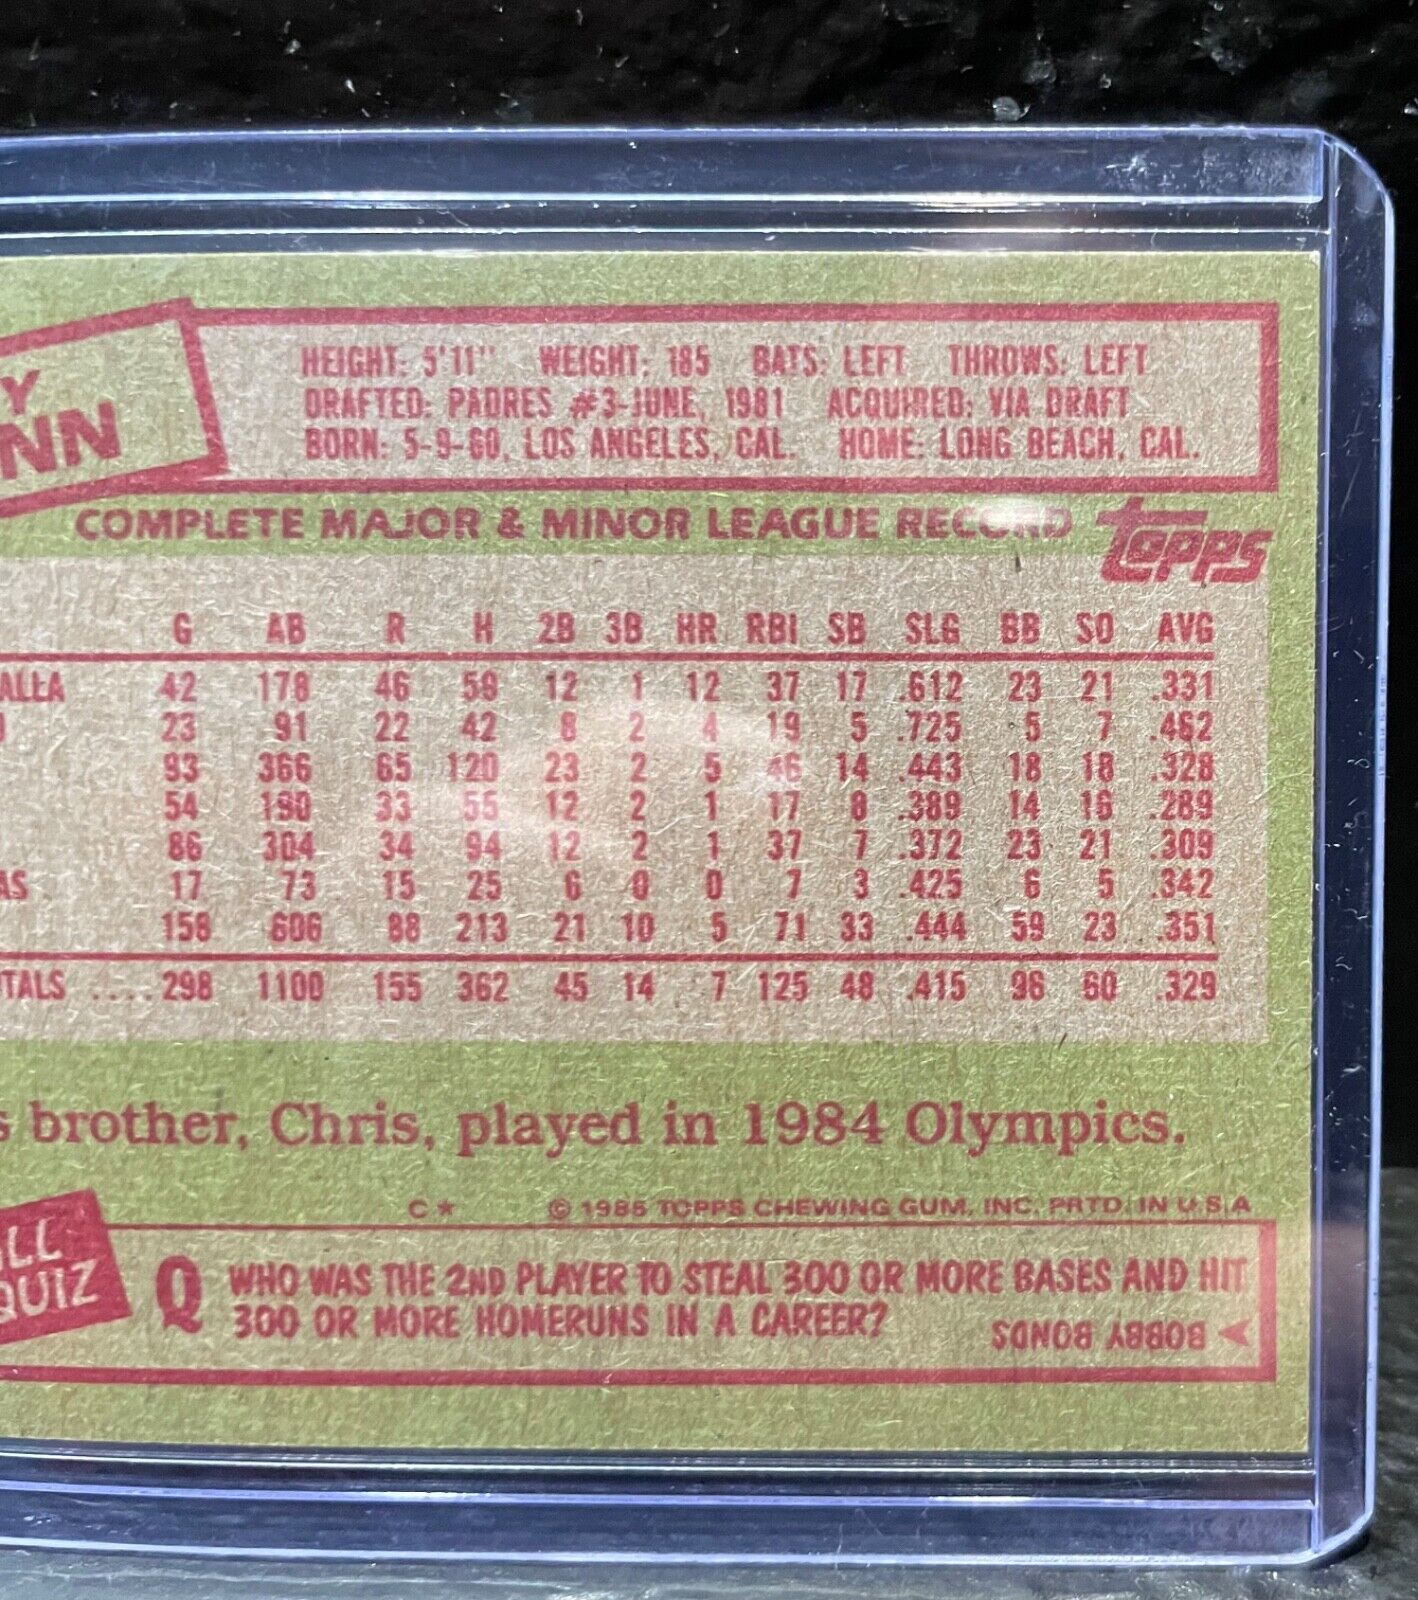 1984-85 TOPPS TONY GWYNN #660 great condition don't hesitate on this one!!🔥🔥🔥